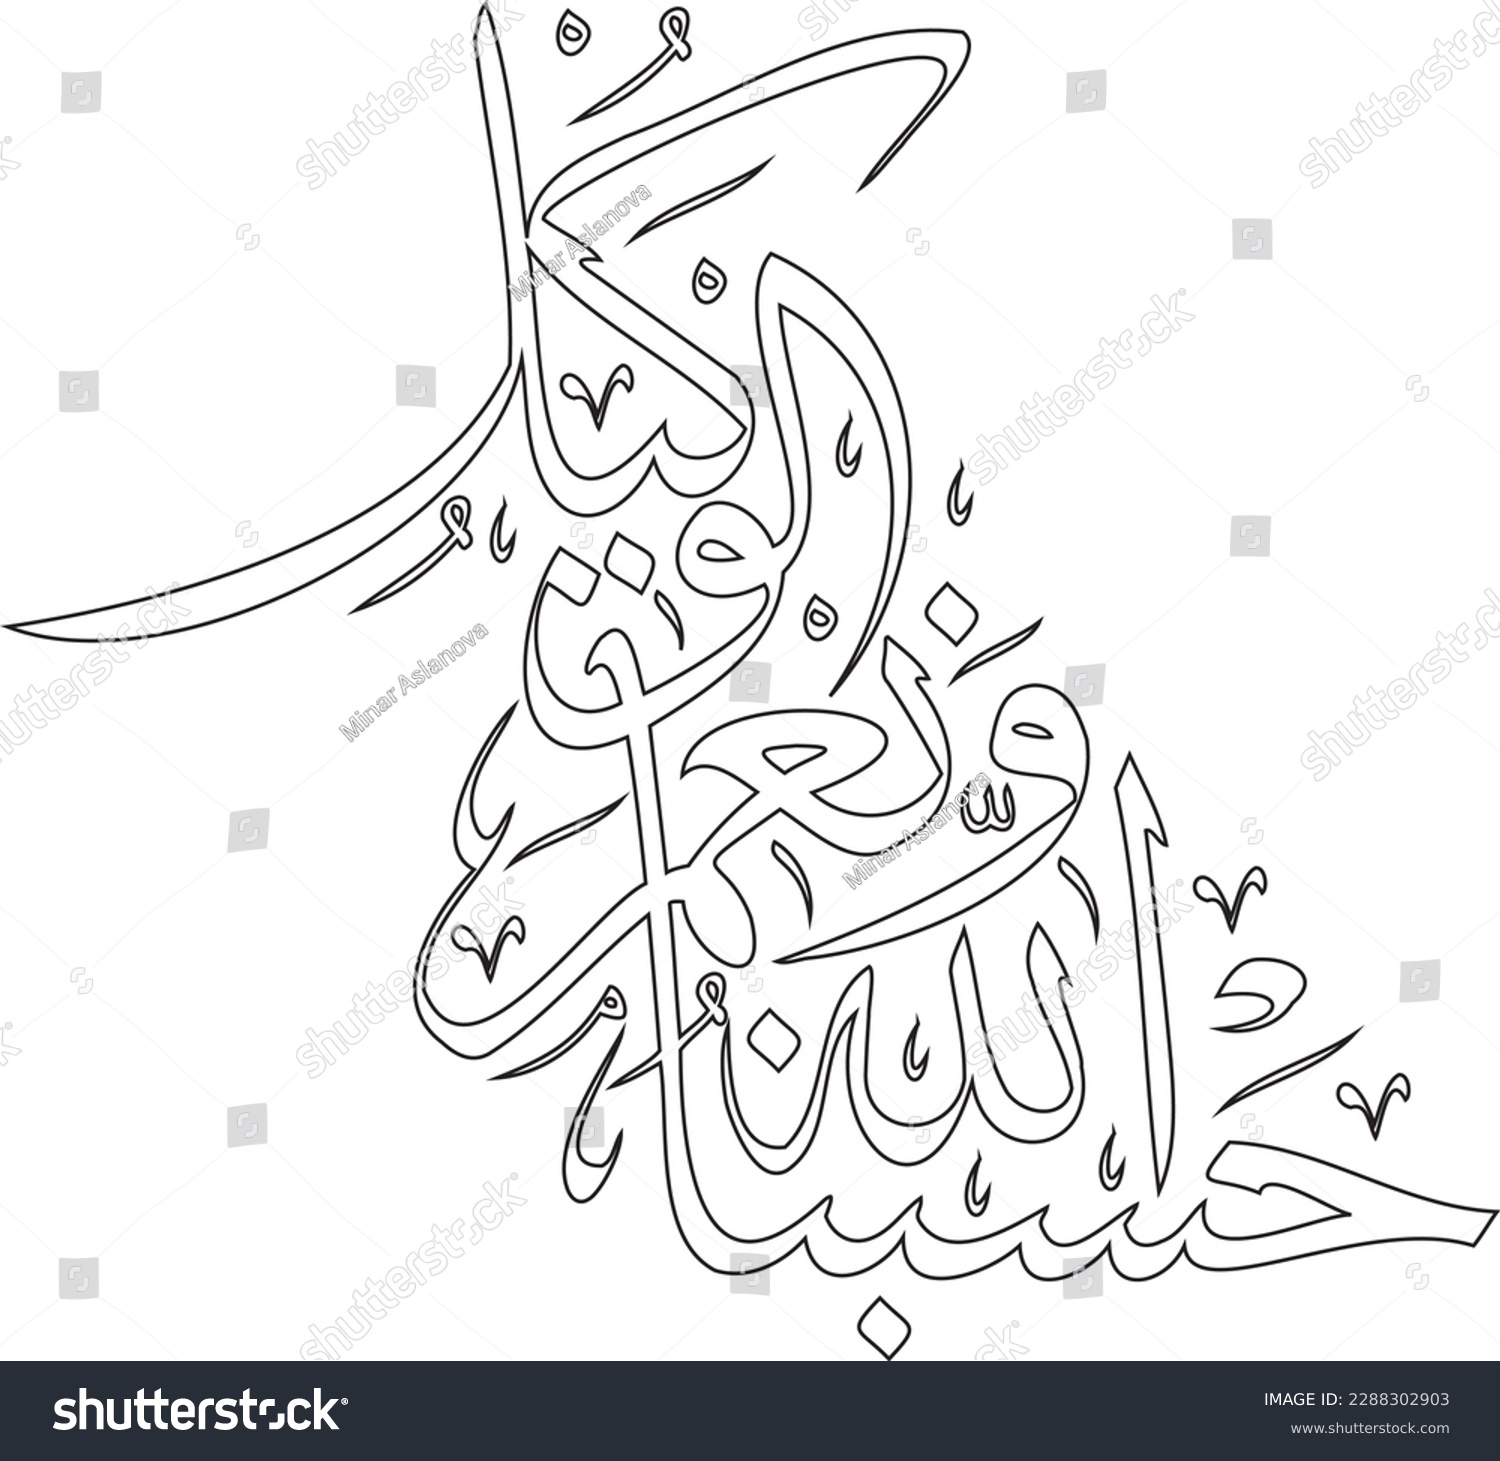 SVG of Arabic Calligraphy Art. Hasbunallah wa nimal Wakil (Sufficient for us is Allah, and [He is] the best Disposer of affairs). Islamic Calligraphy Vector svg